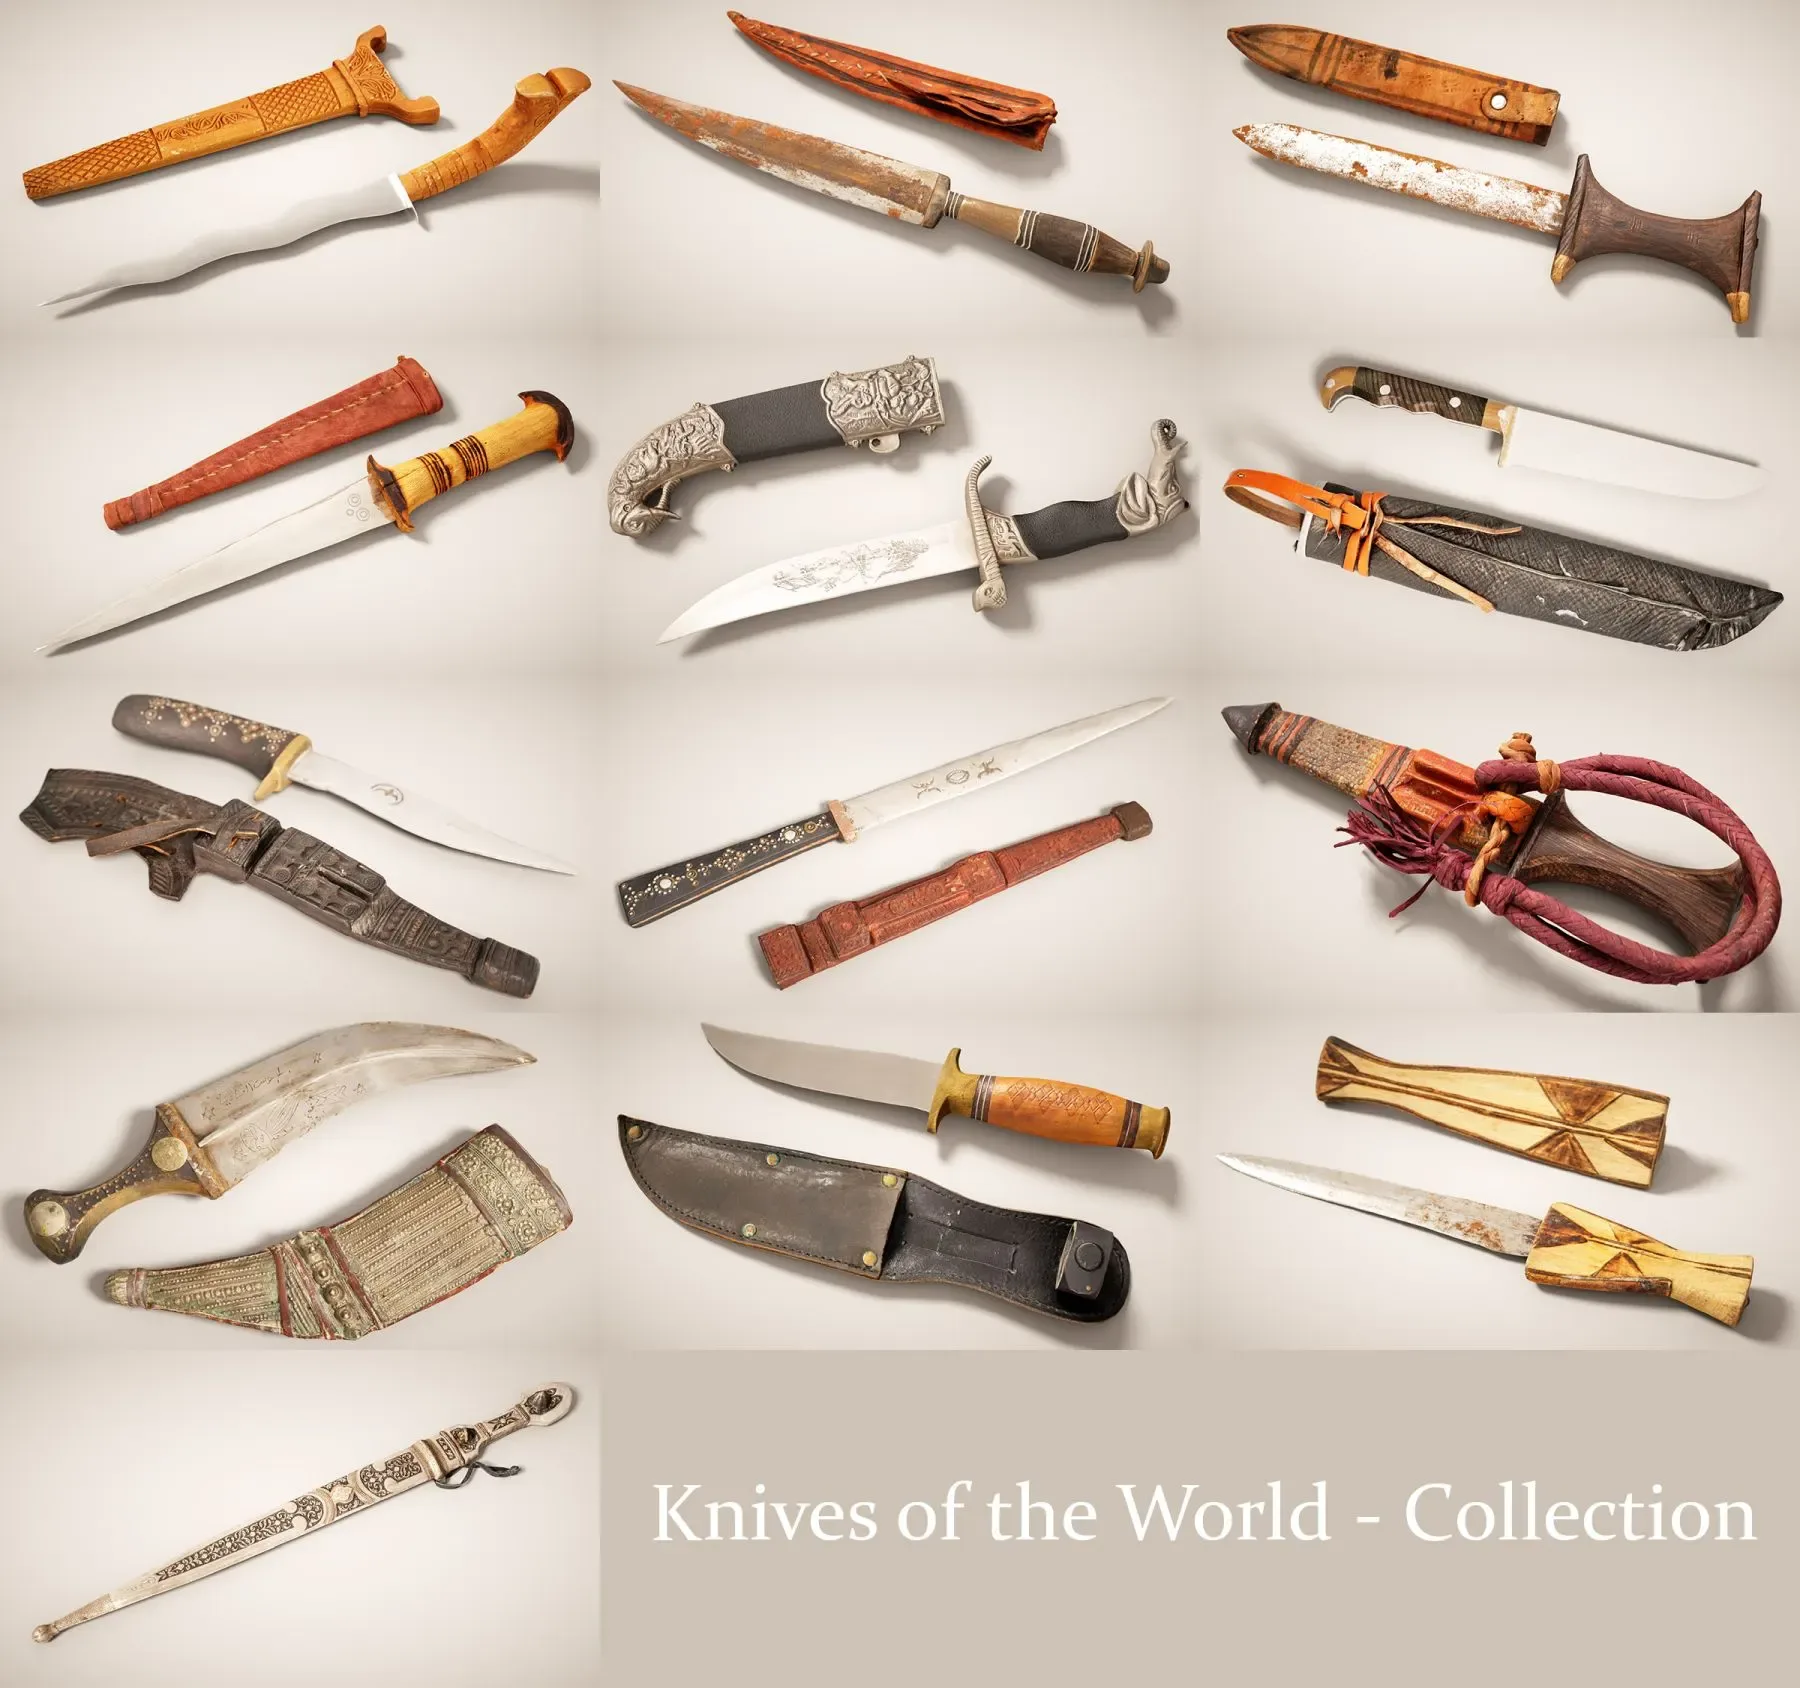 13 High-Quality 3D Scanned Knife Collection - OBJ Format with 2K Textures for Games, 3D Printing, Arch Viz, and Virtual Reality